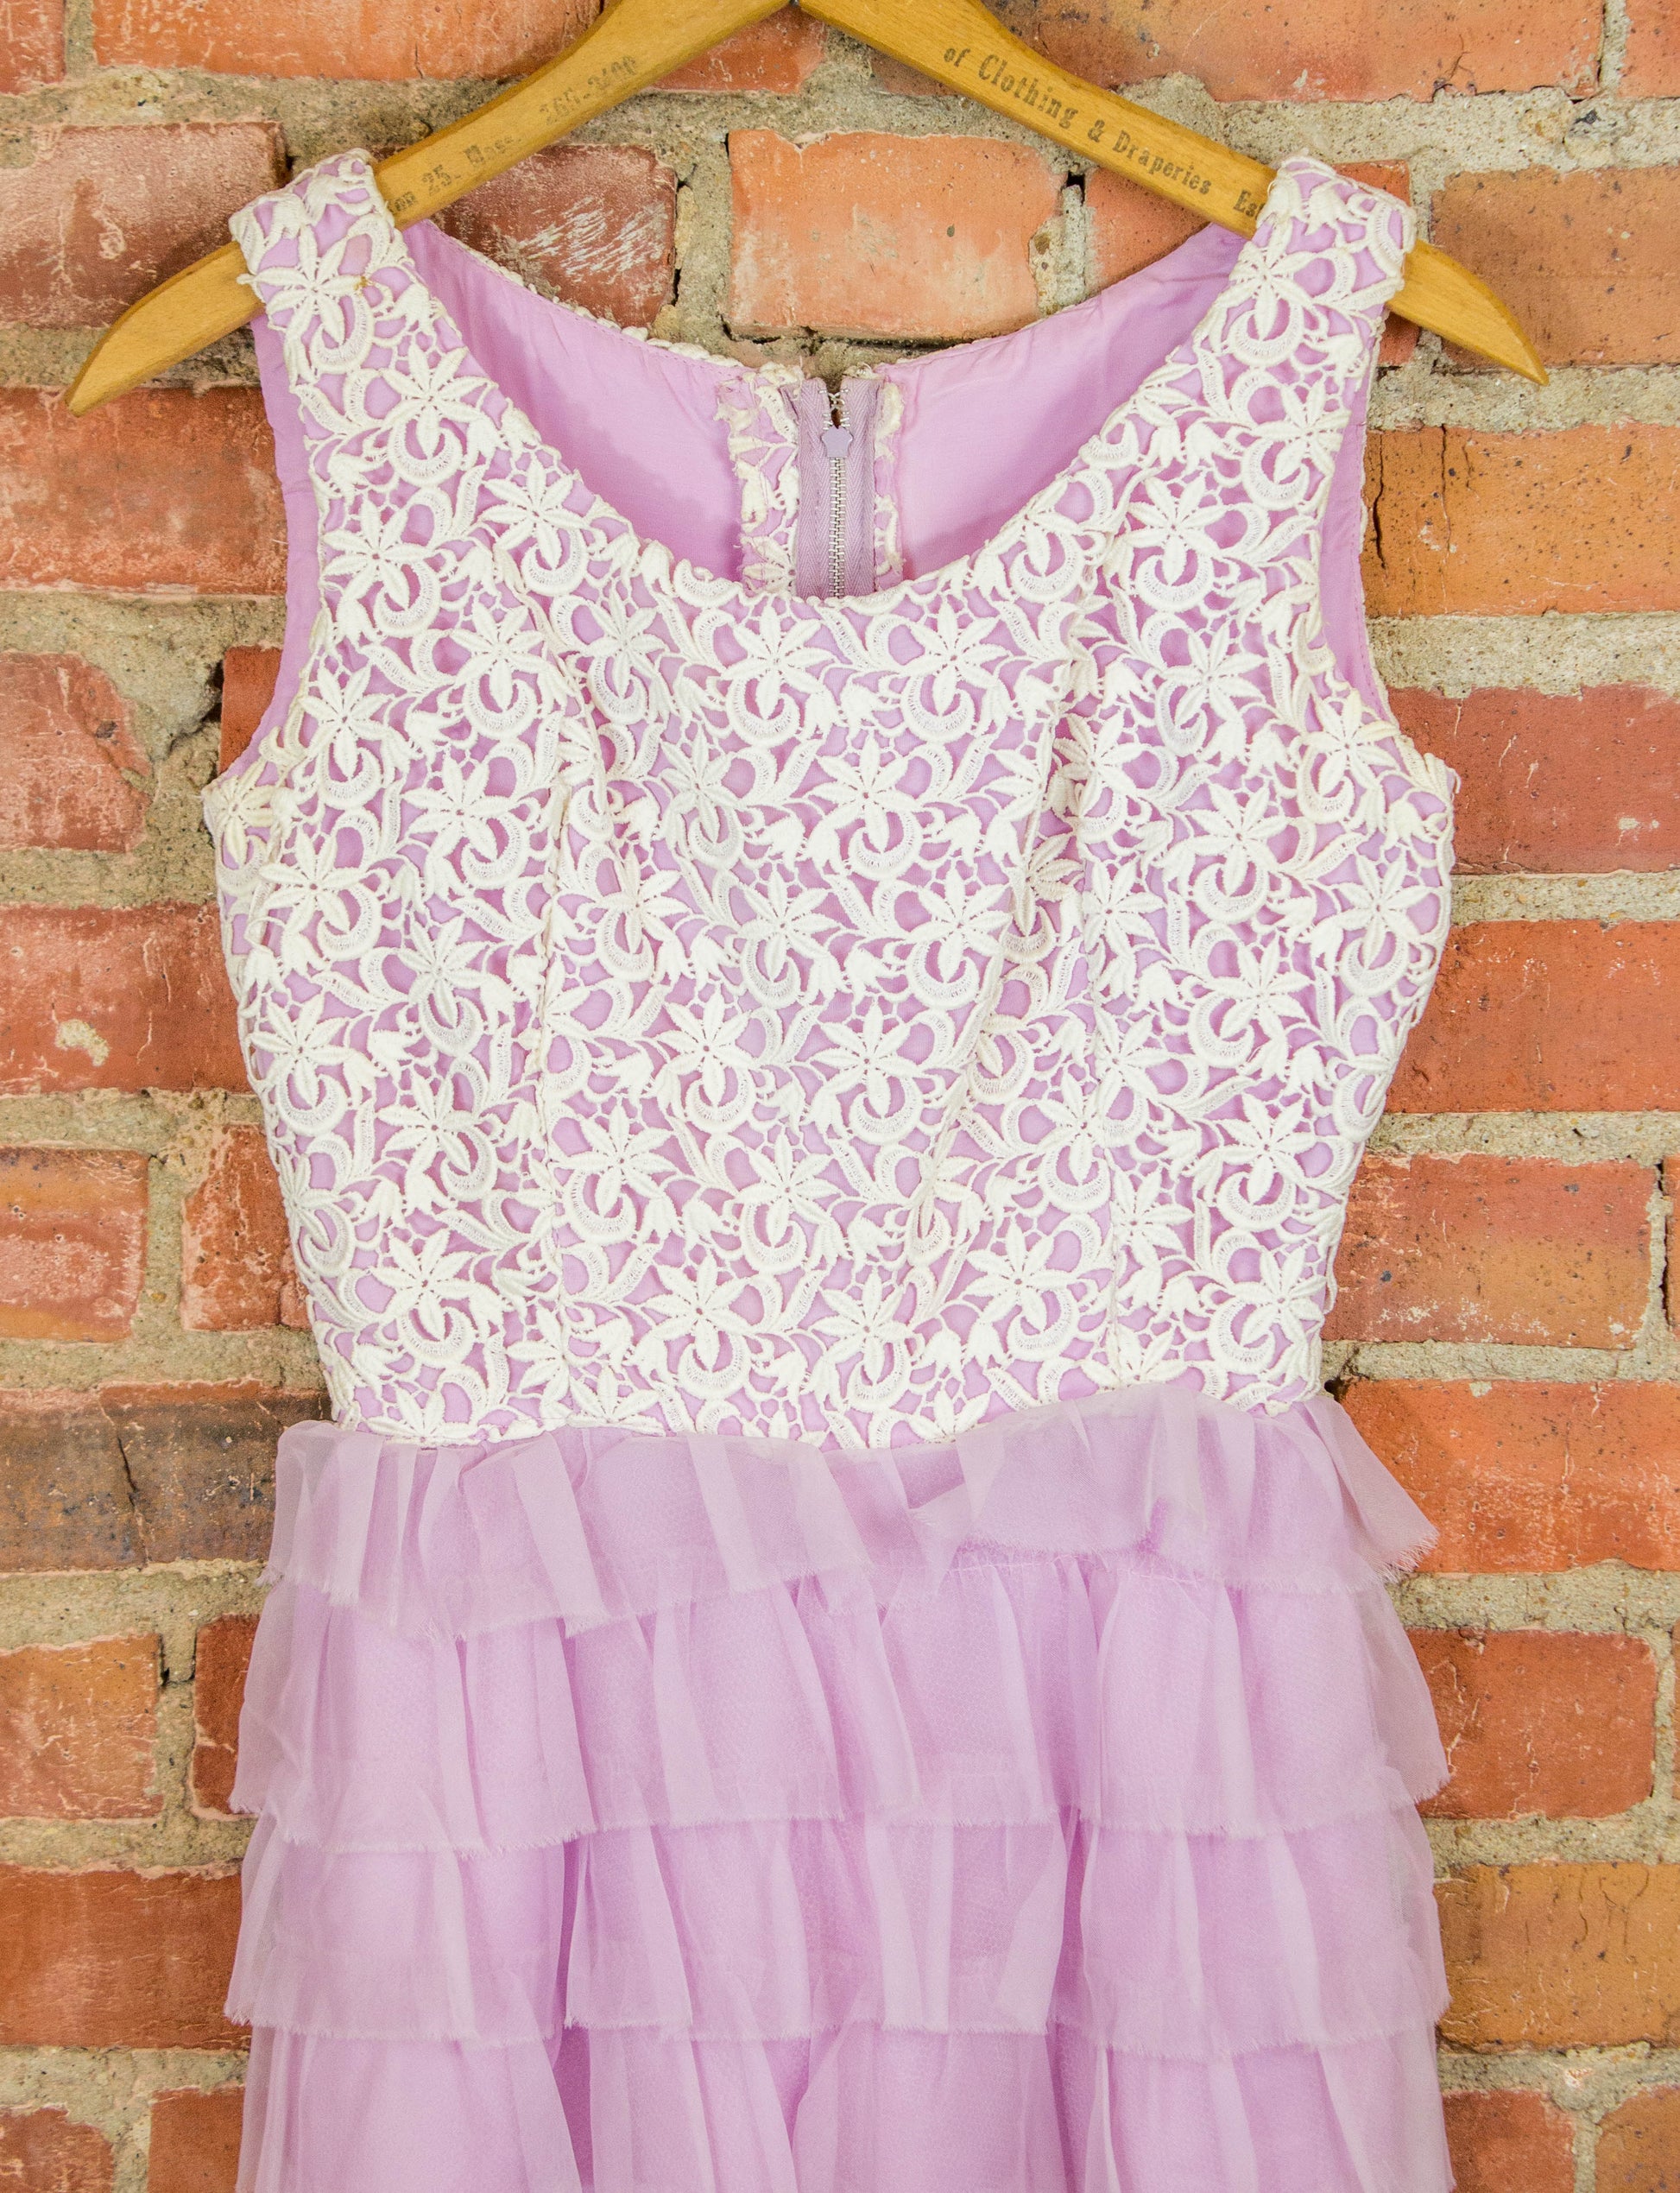 Vintage 60s Sleeveless Lavender Lace Ruffled Bellbottom Jumpsuit by Nadine Small